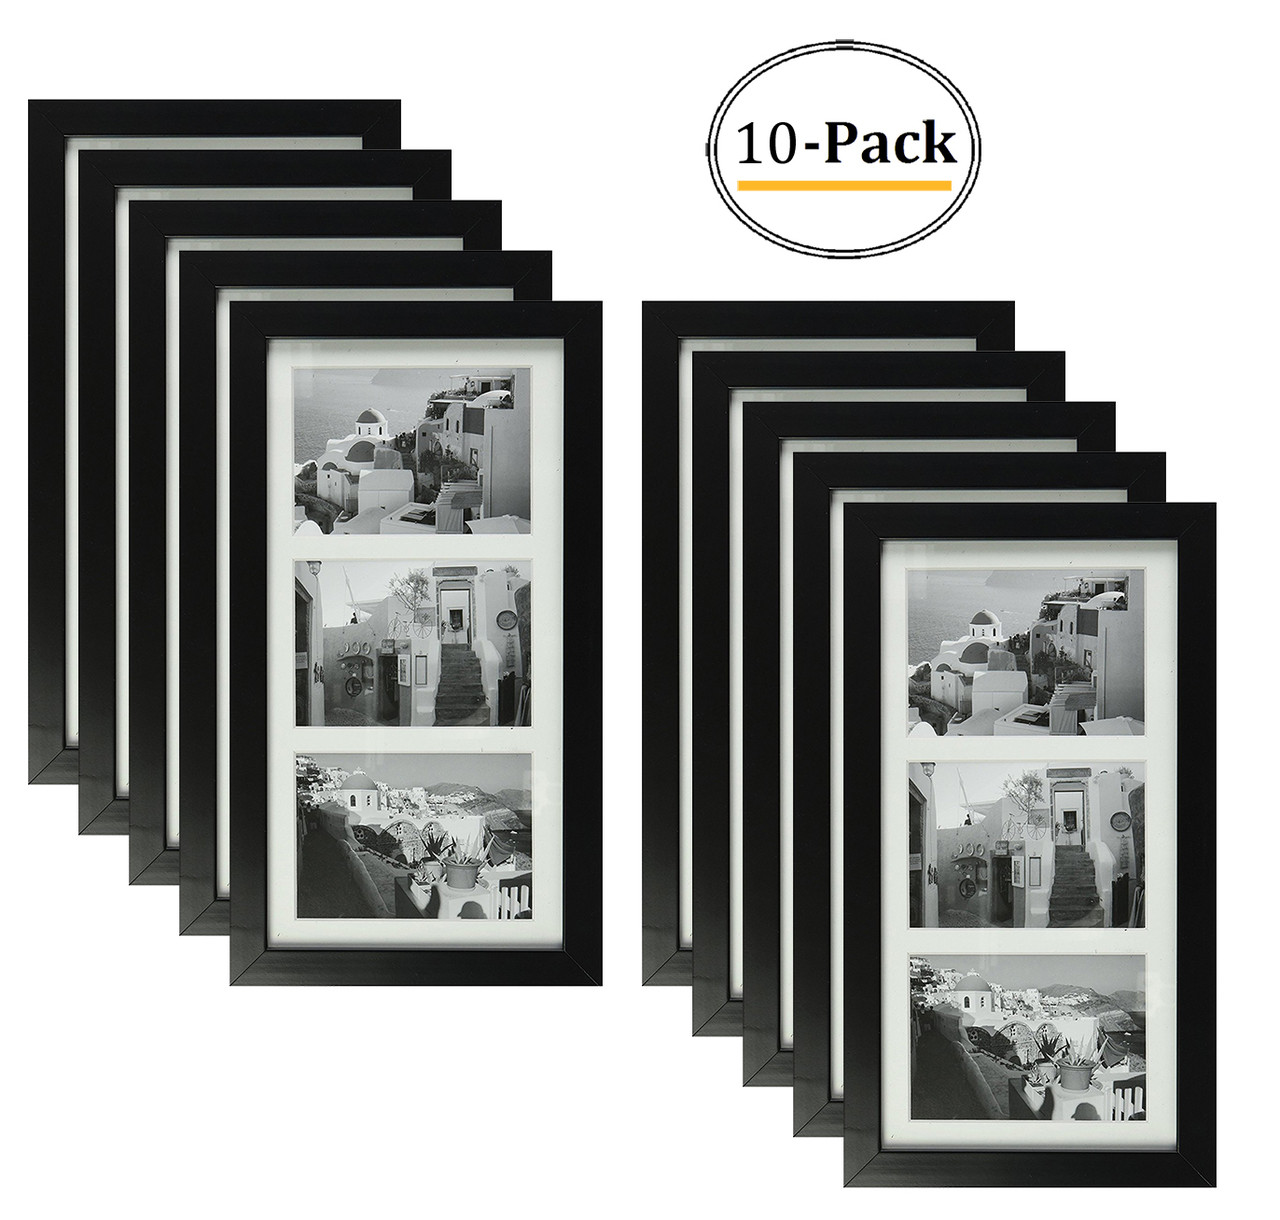 4"x6" pictures 3 7x14 Black Photo Wood Collage Frame with Mat displays 